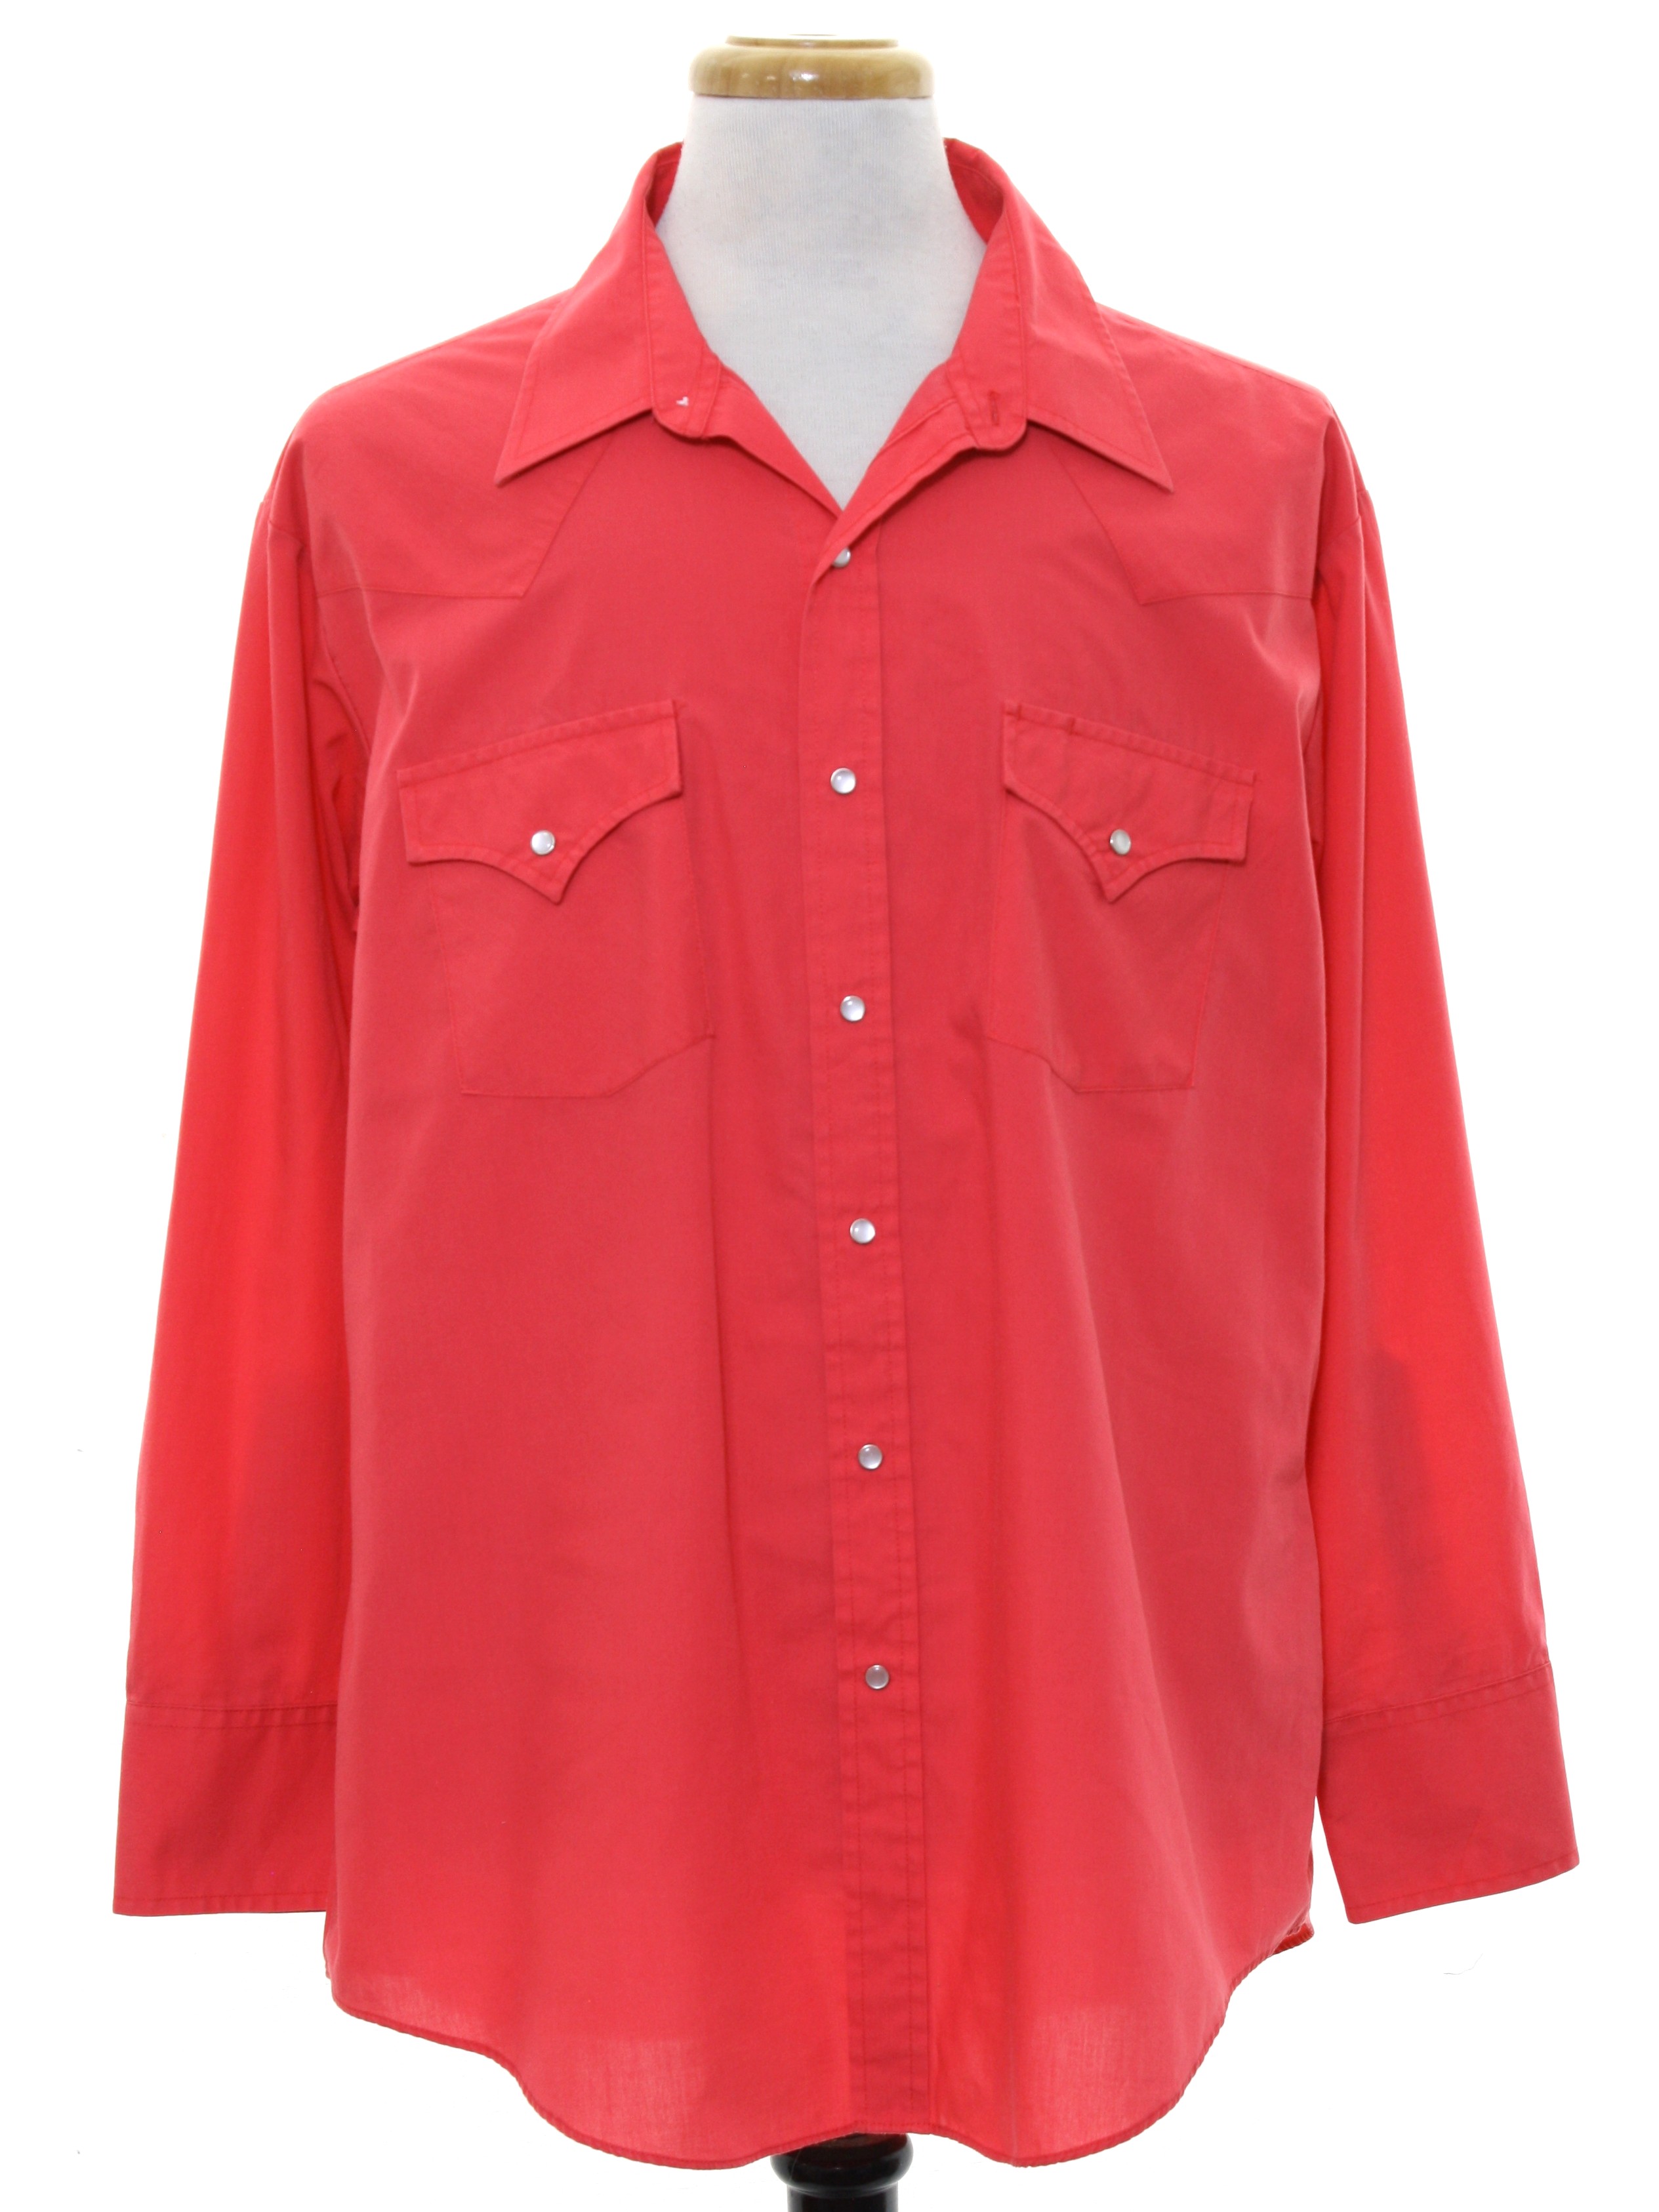 Western Shirt: 90s -Sheplers- Mens Coral red background polyester ...